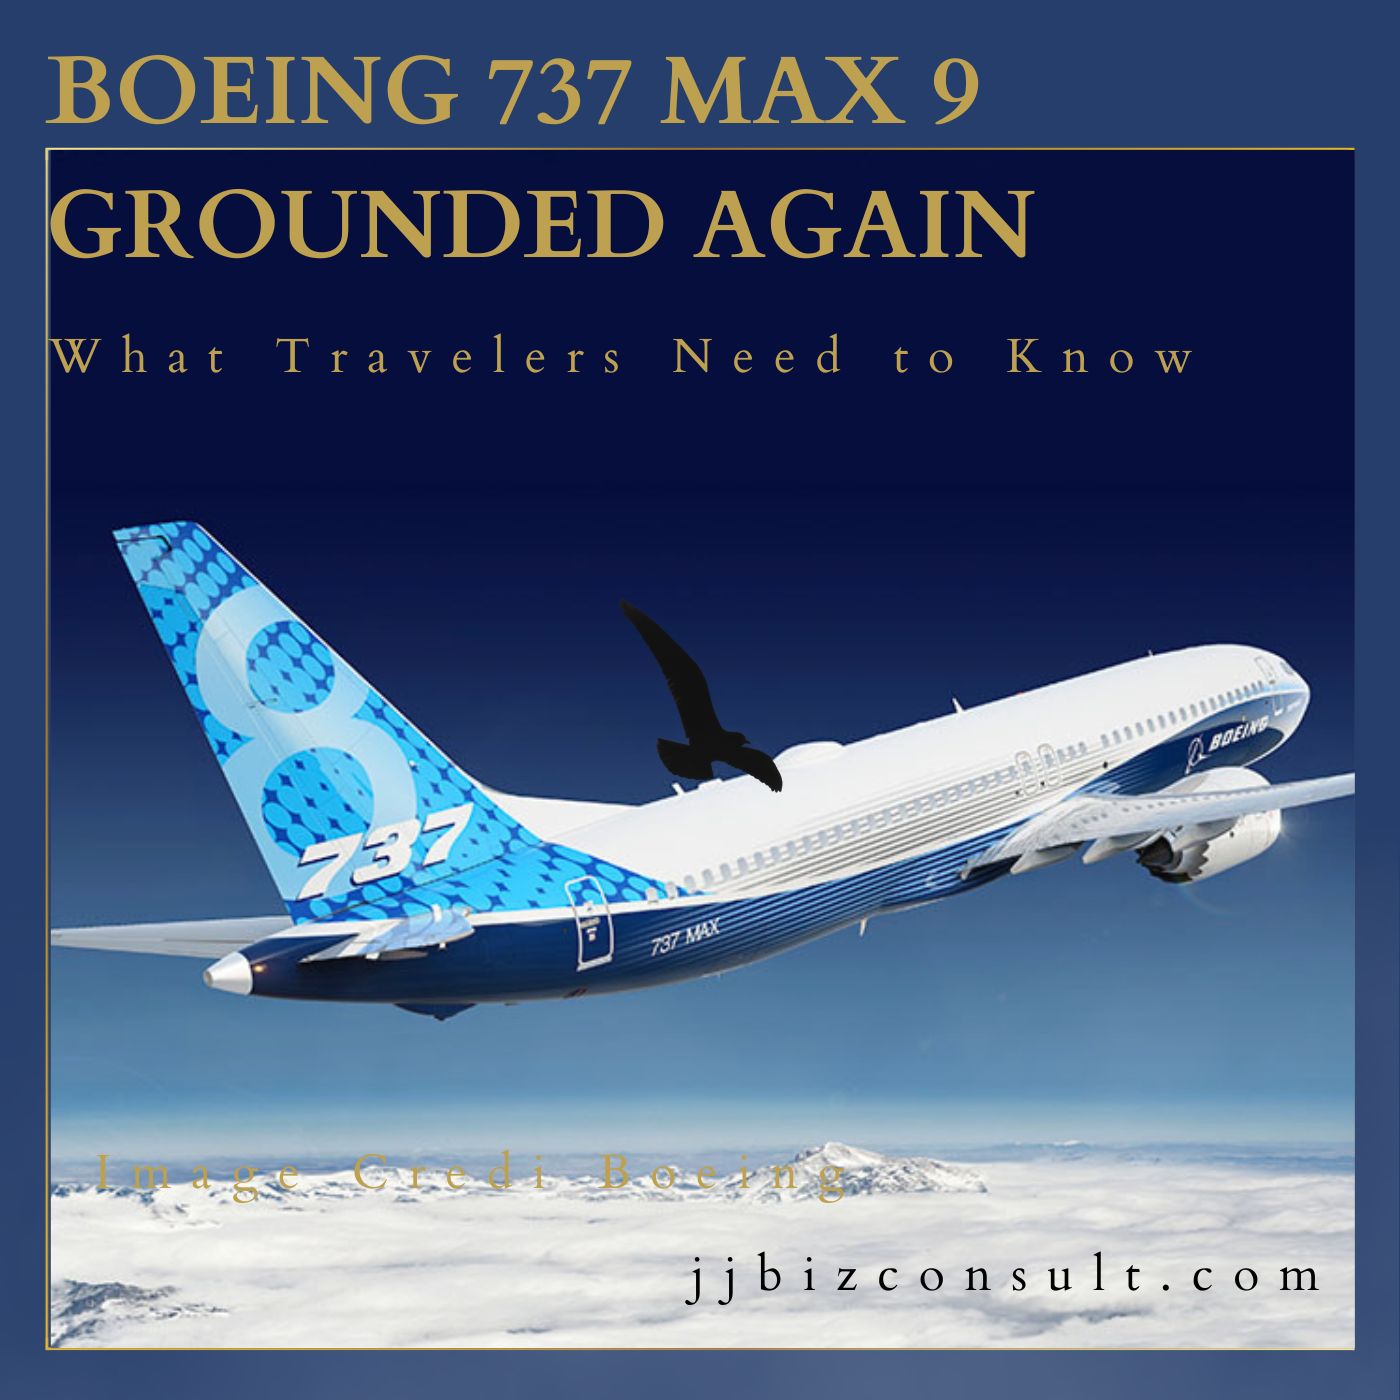 Boeing 737 Max 9 Grounded Again: What Travelers Need to Know